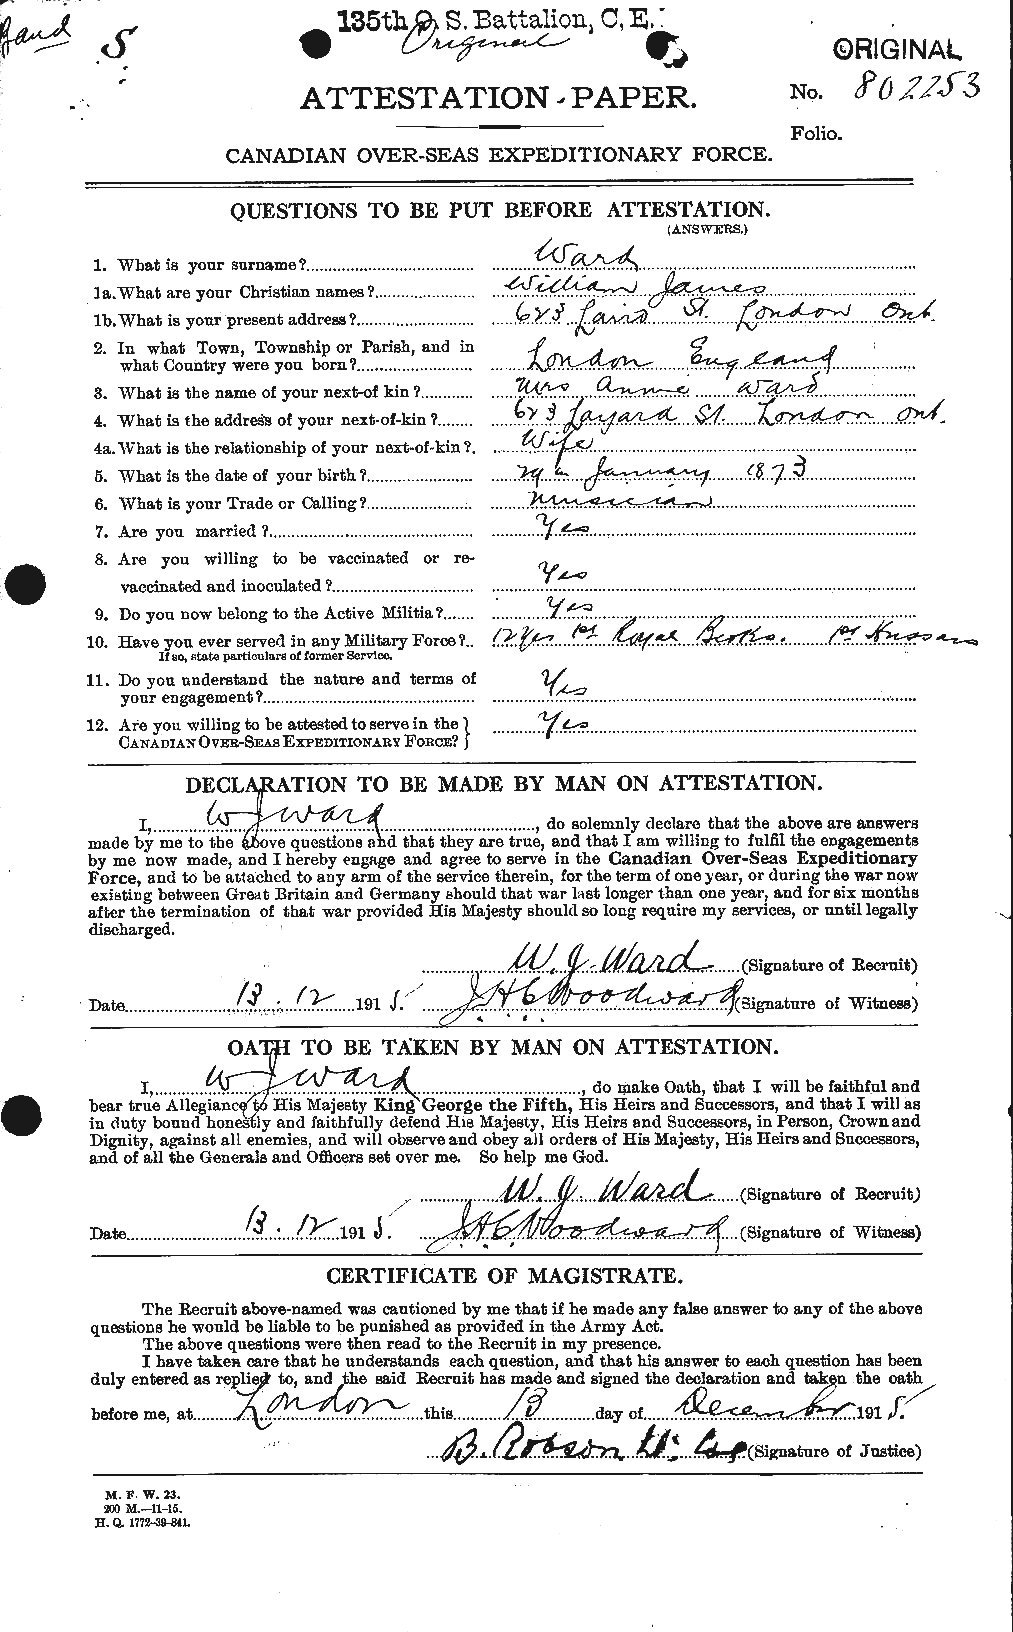 Personnel Records of the First World War - CEF 659829a